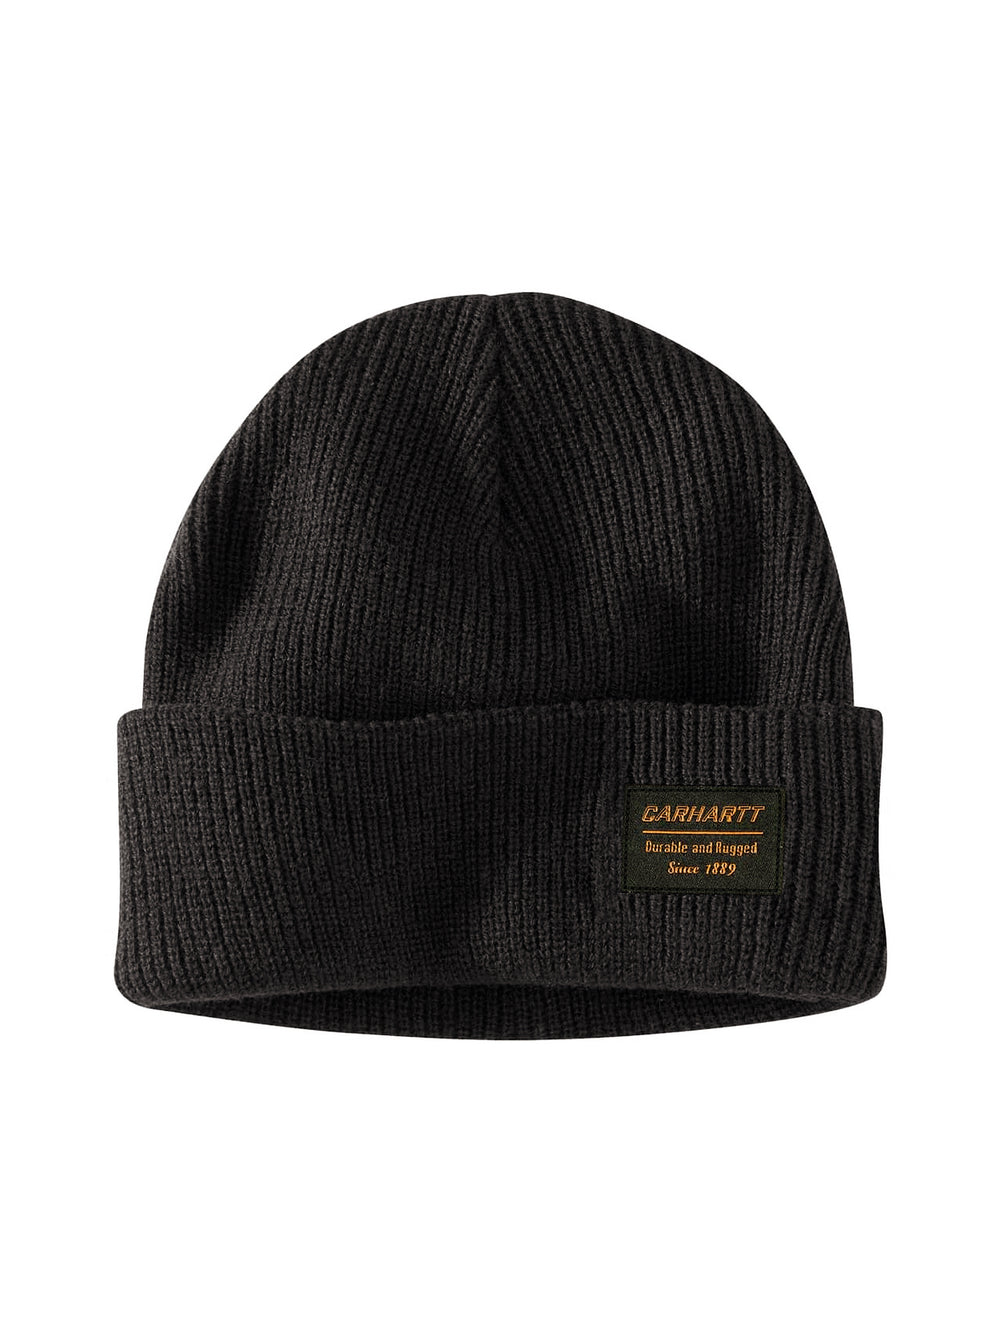 Boathouse CARHARTT KNIT INS LOGO GRAPHIC BEANIE - CLEARANCE